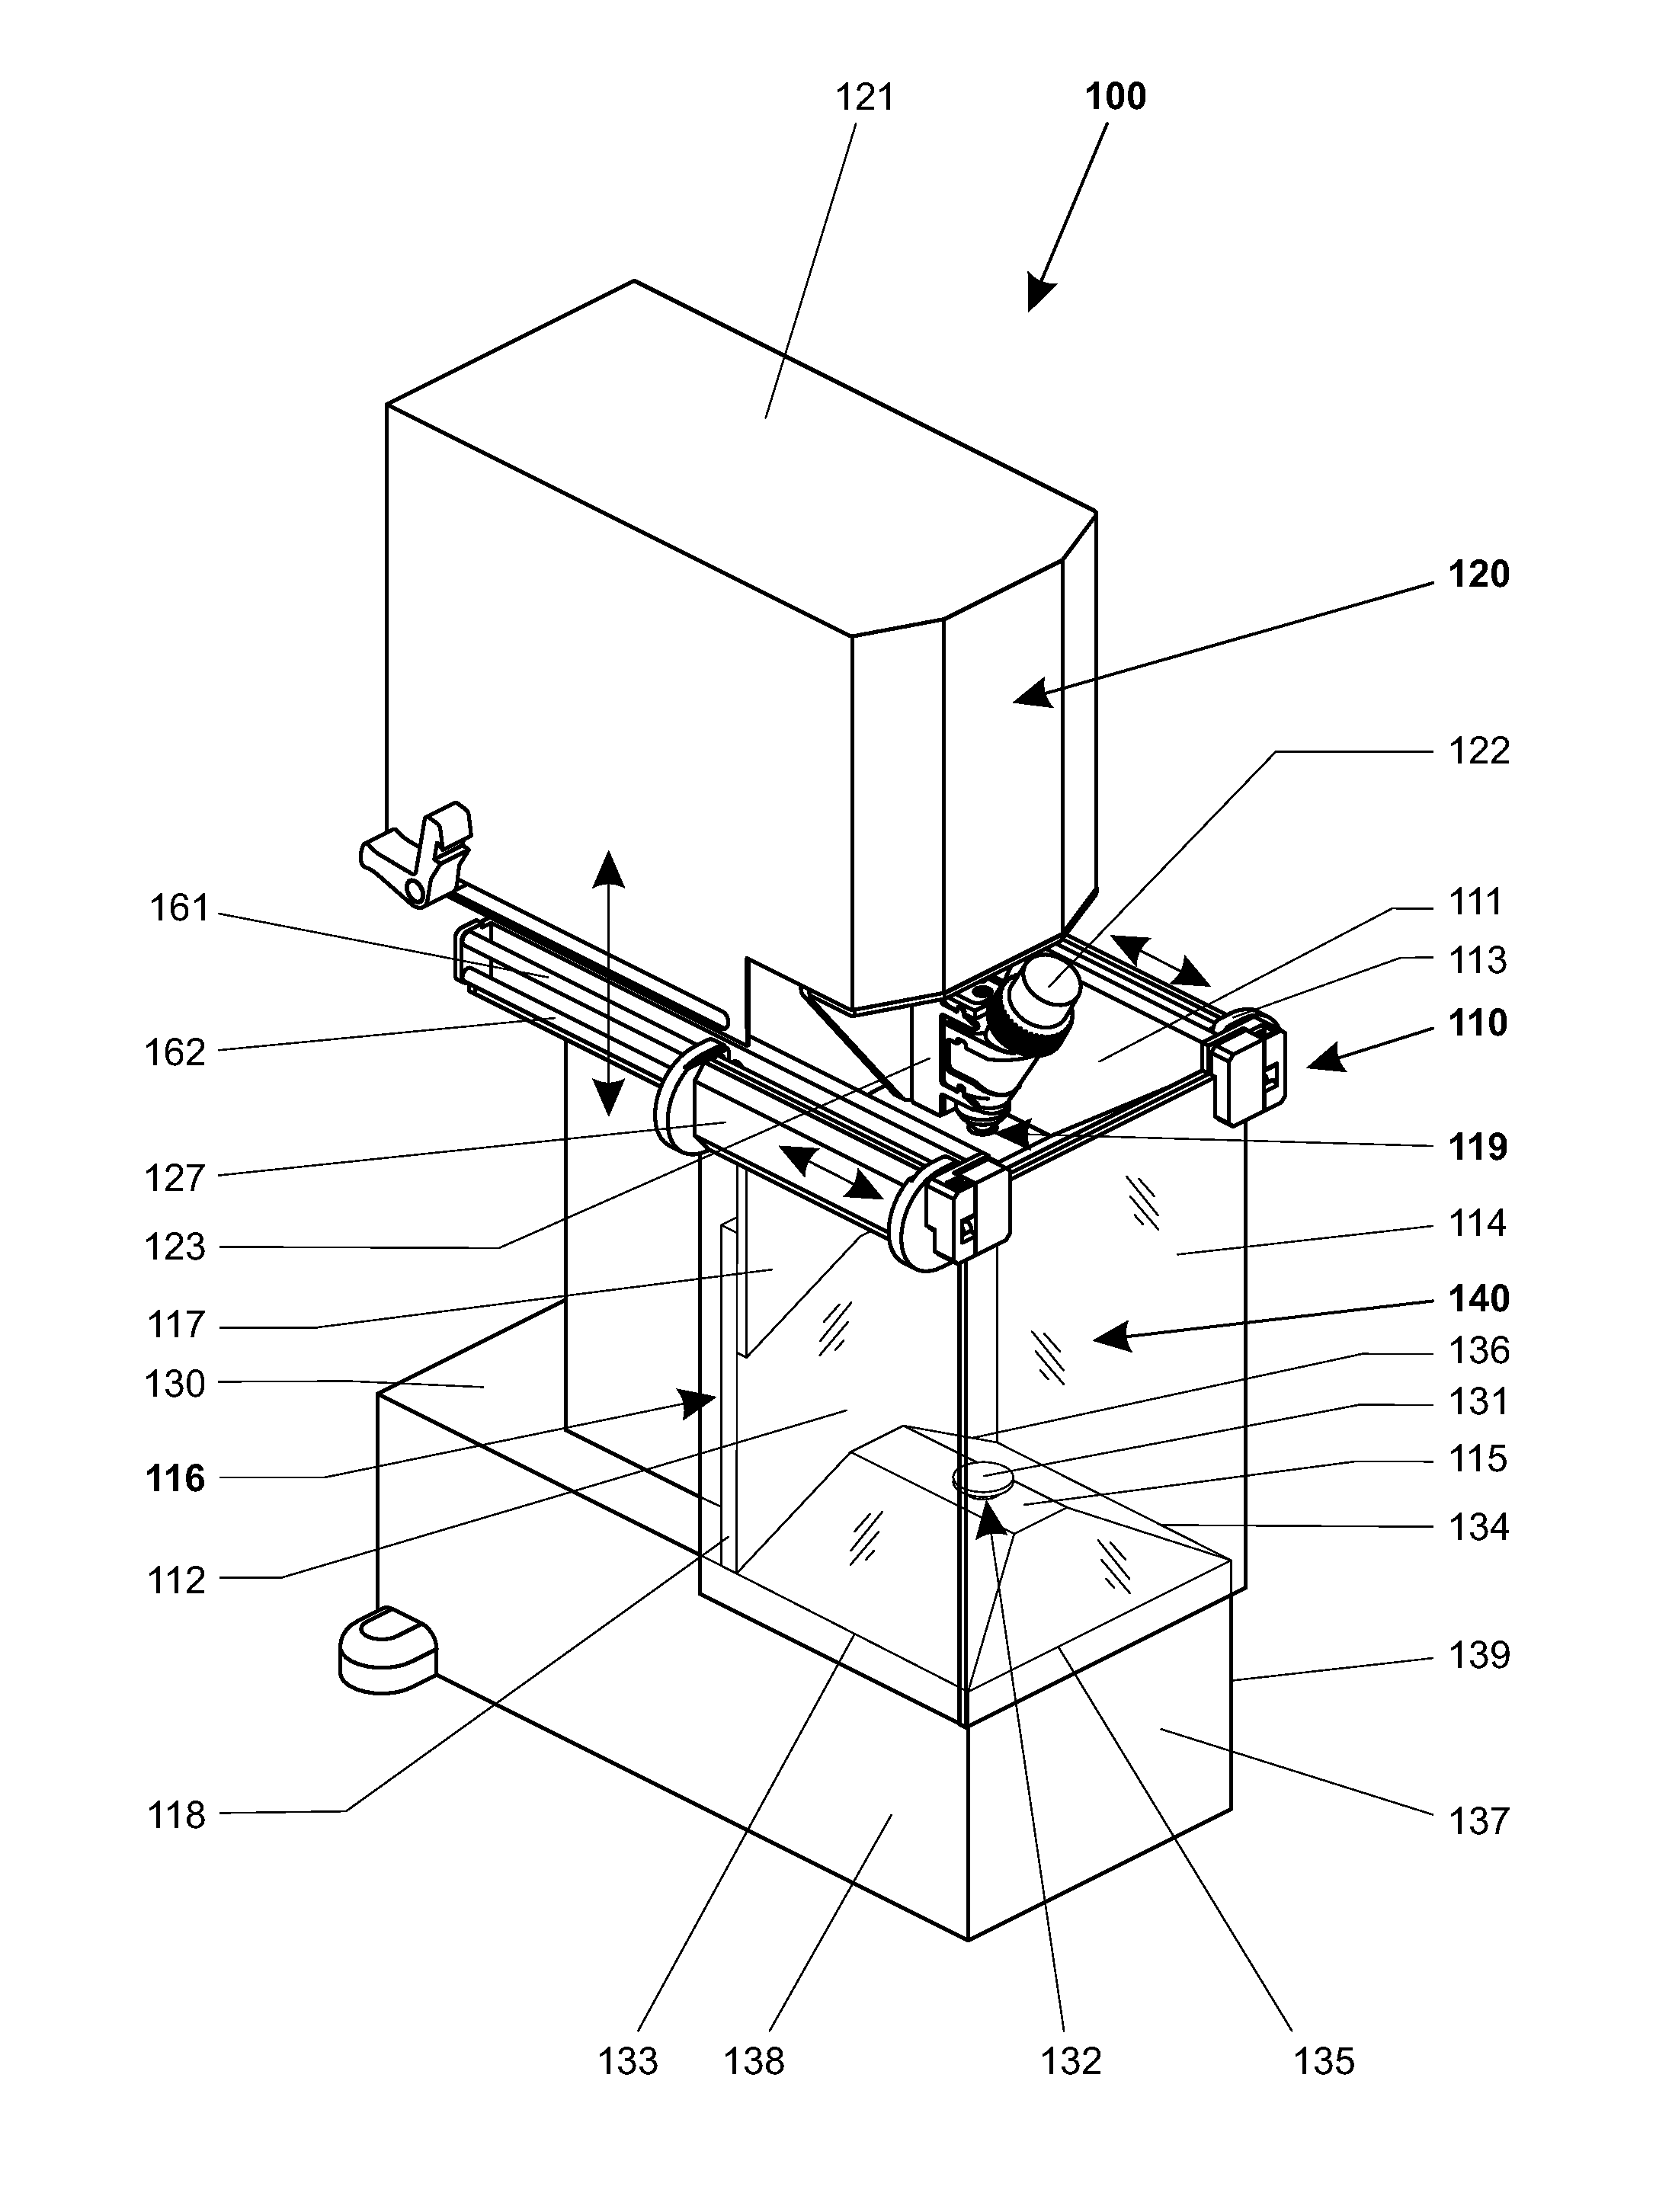 Draft protection device for a laboratory instrument